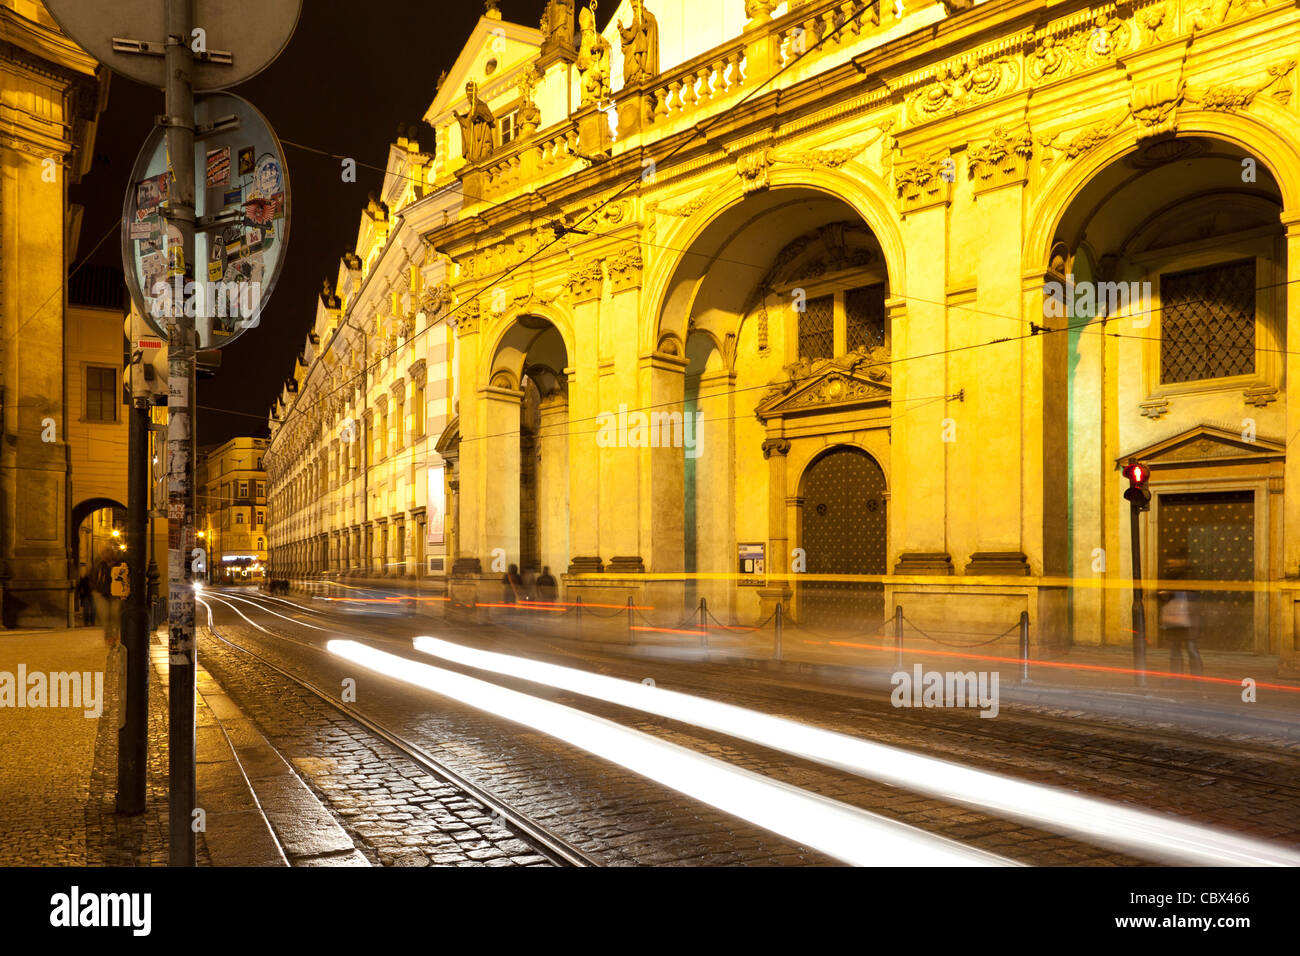 Streaks of light from passing cars on Krizovnicka in Old Town Prag. Stock Photo